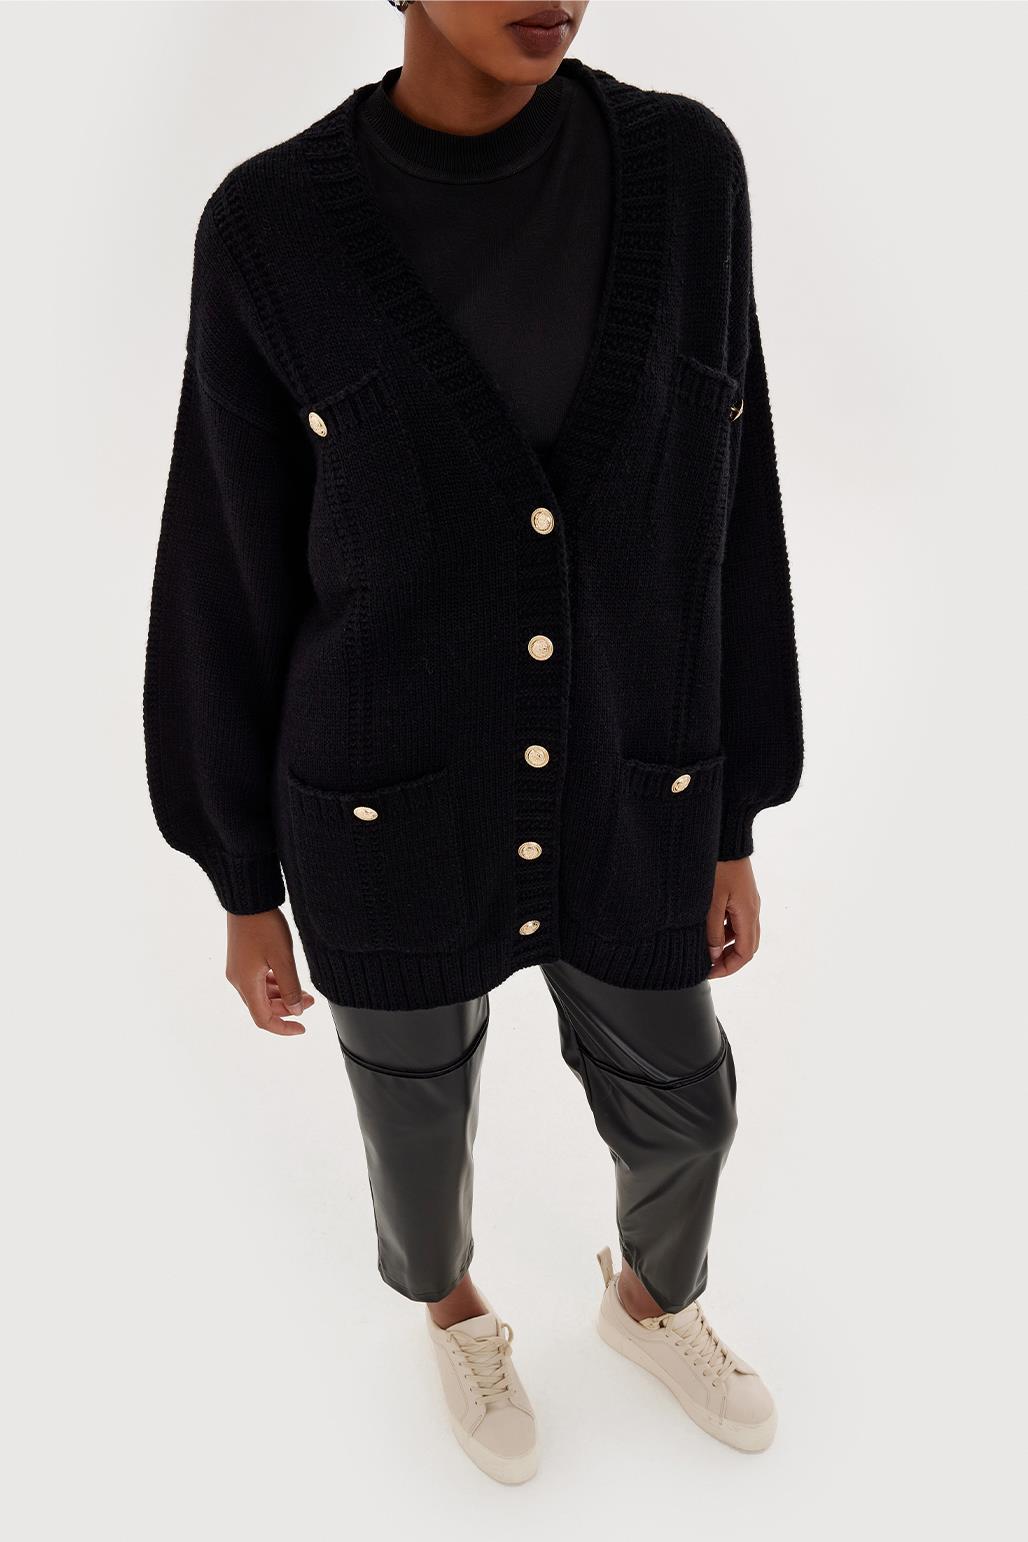 Knit Cardigan With Gold Buttons Black